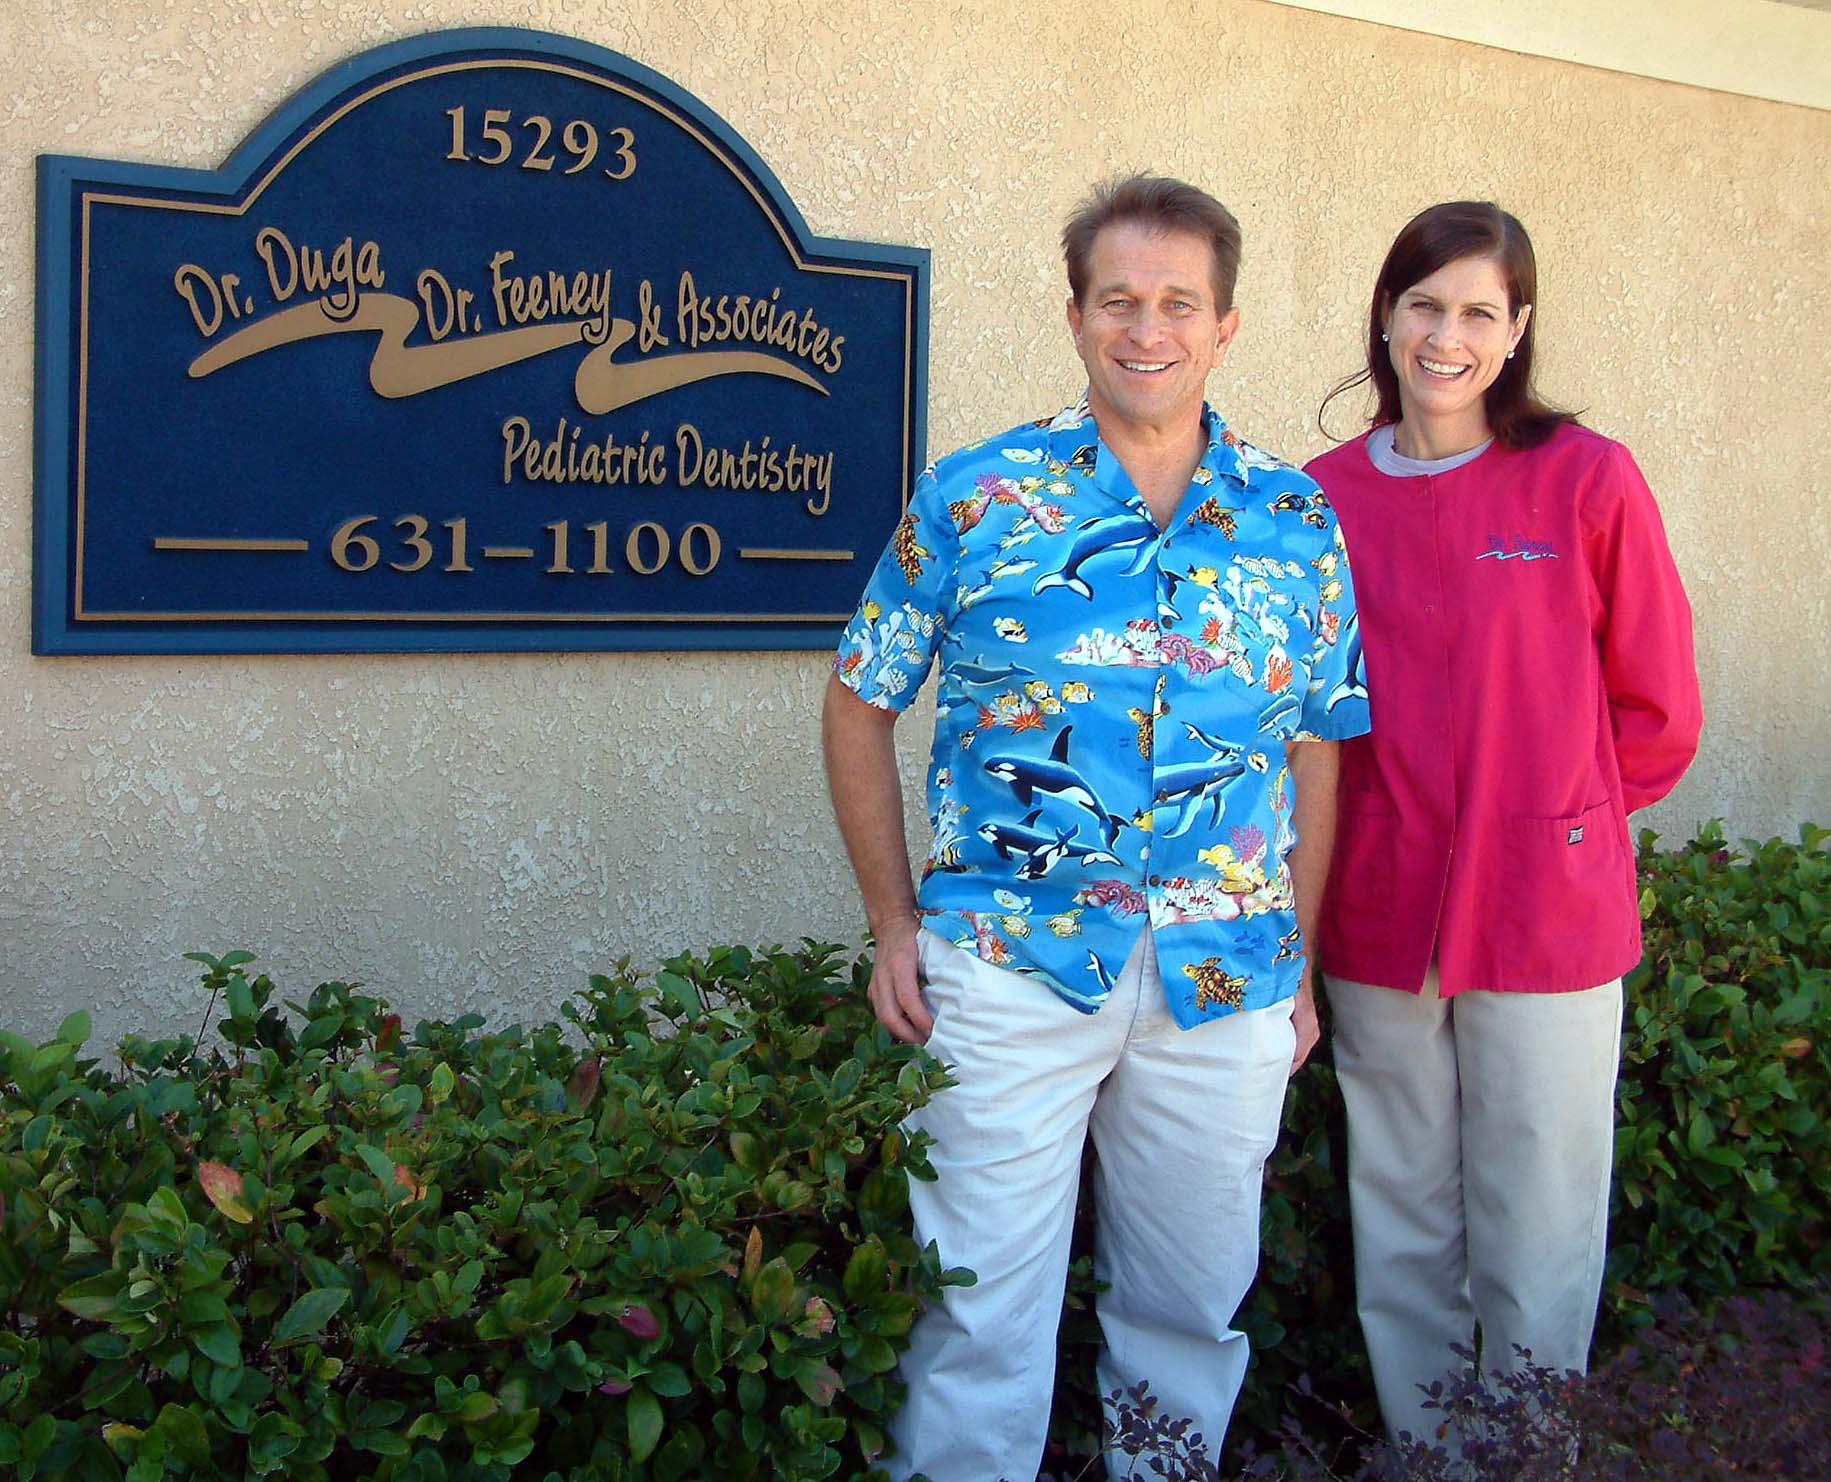 Image Dr. Duga, Dr. Feeney & Associates Pediatric Dentistry the Pediatric Dentists in Tampa FL - Gallery of ListasLocales.com